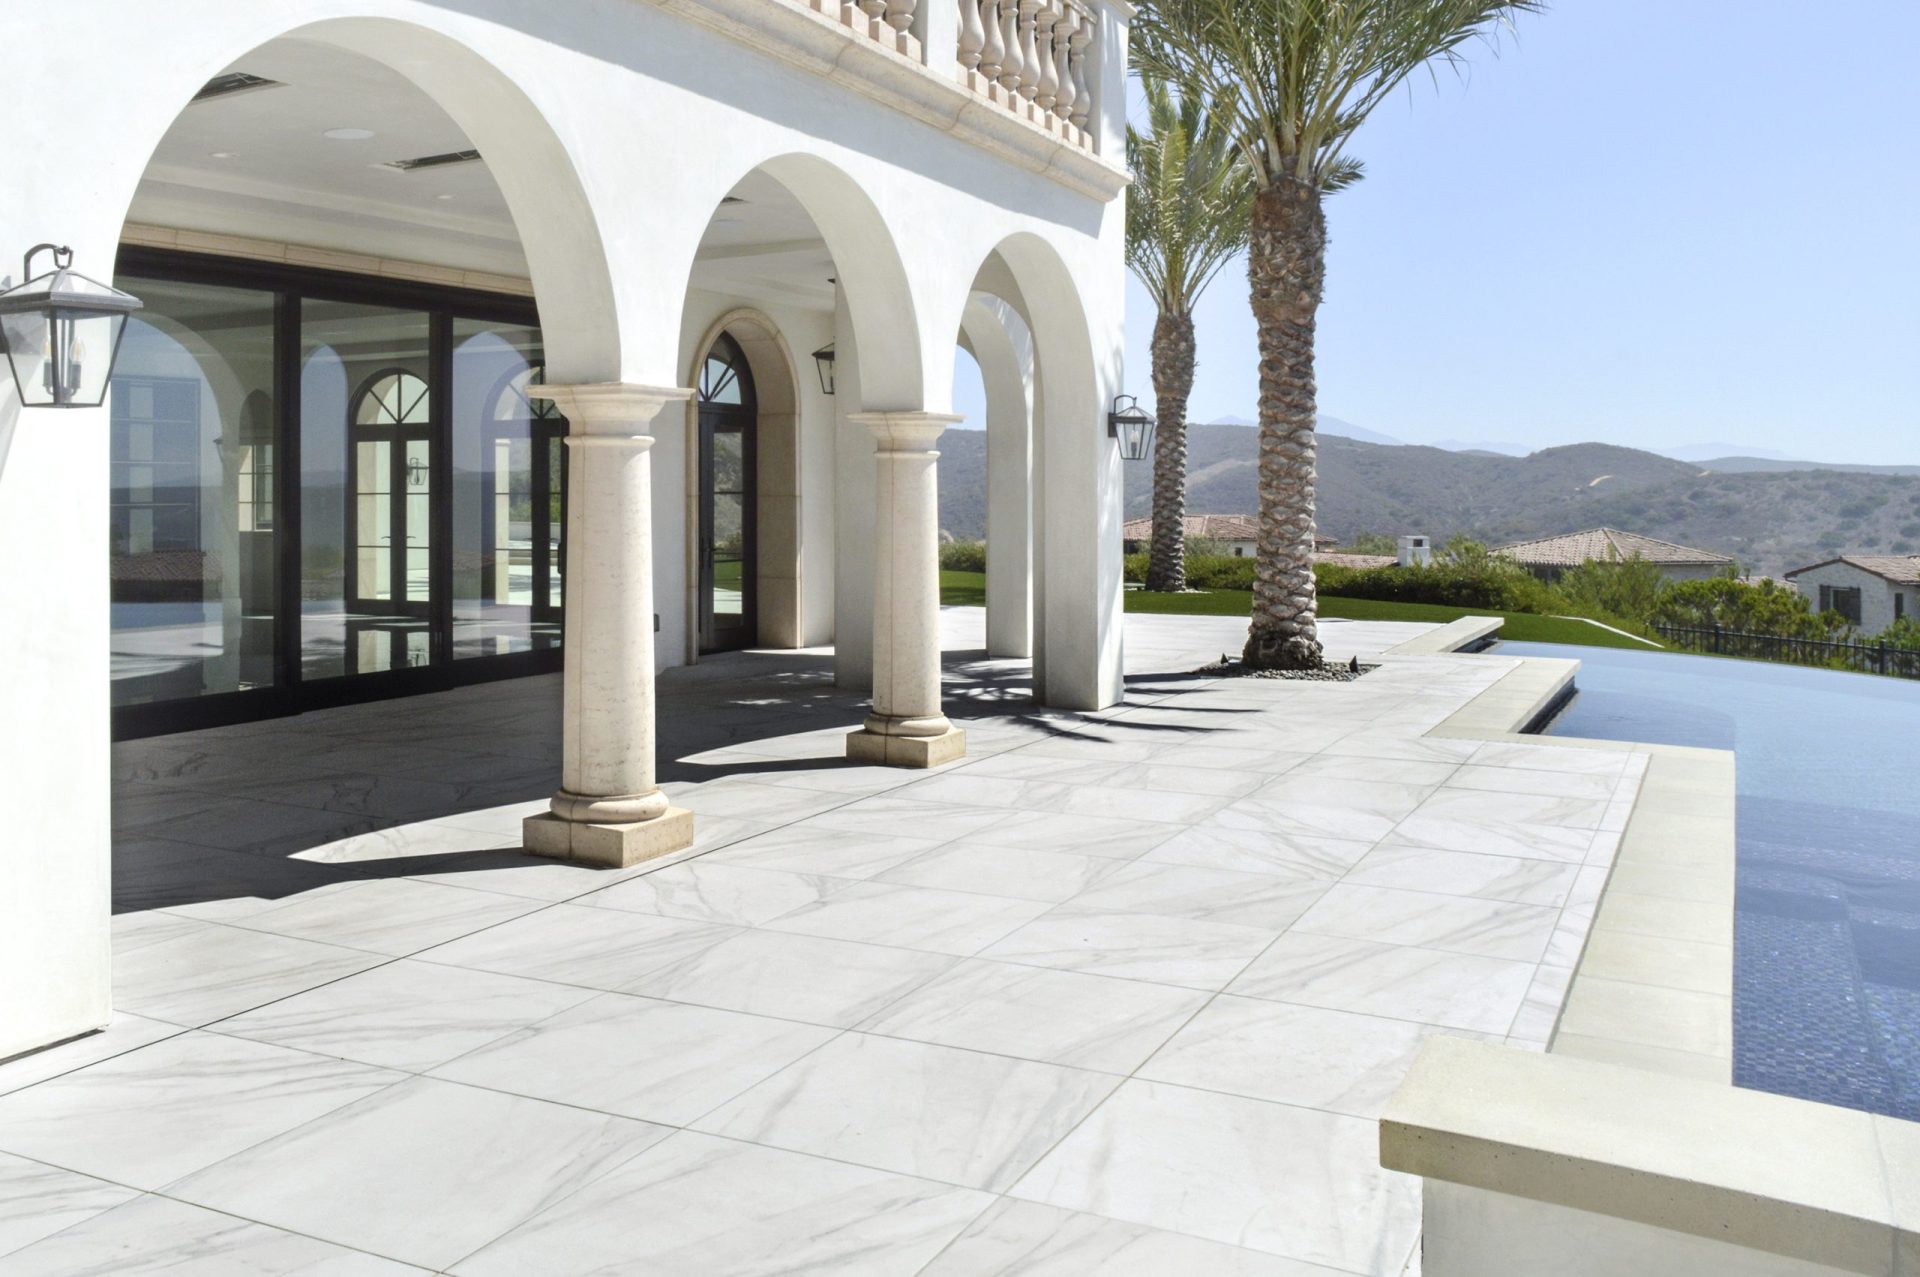 Calacatta Gold porcelain pavers installed in outdoor pool space